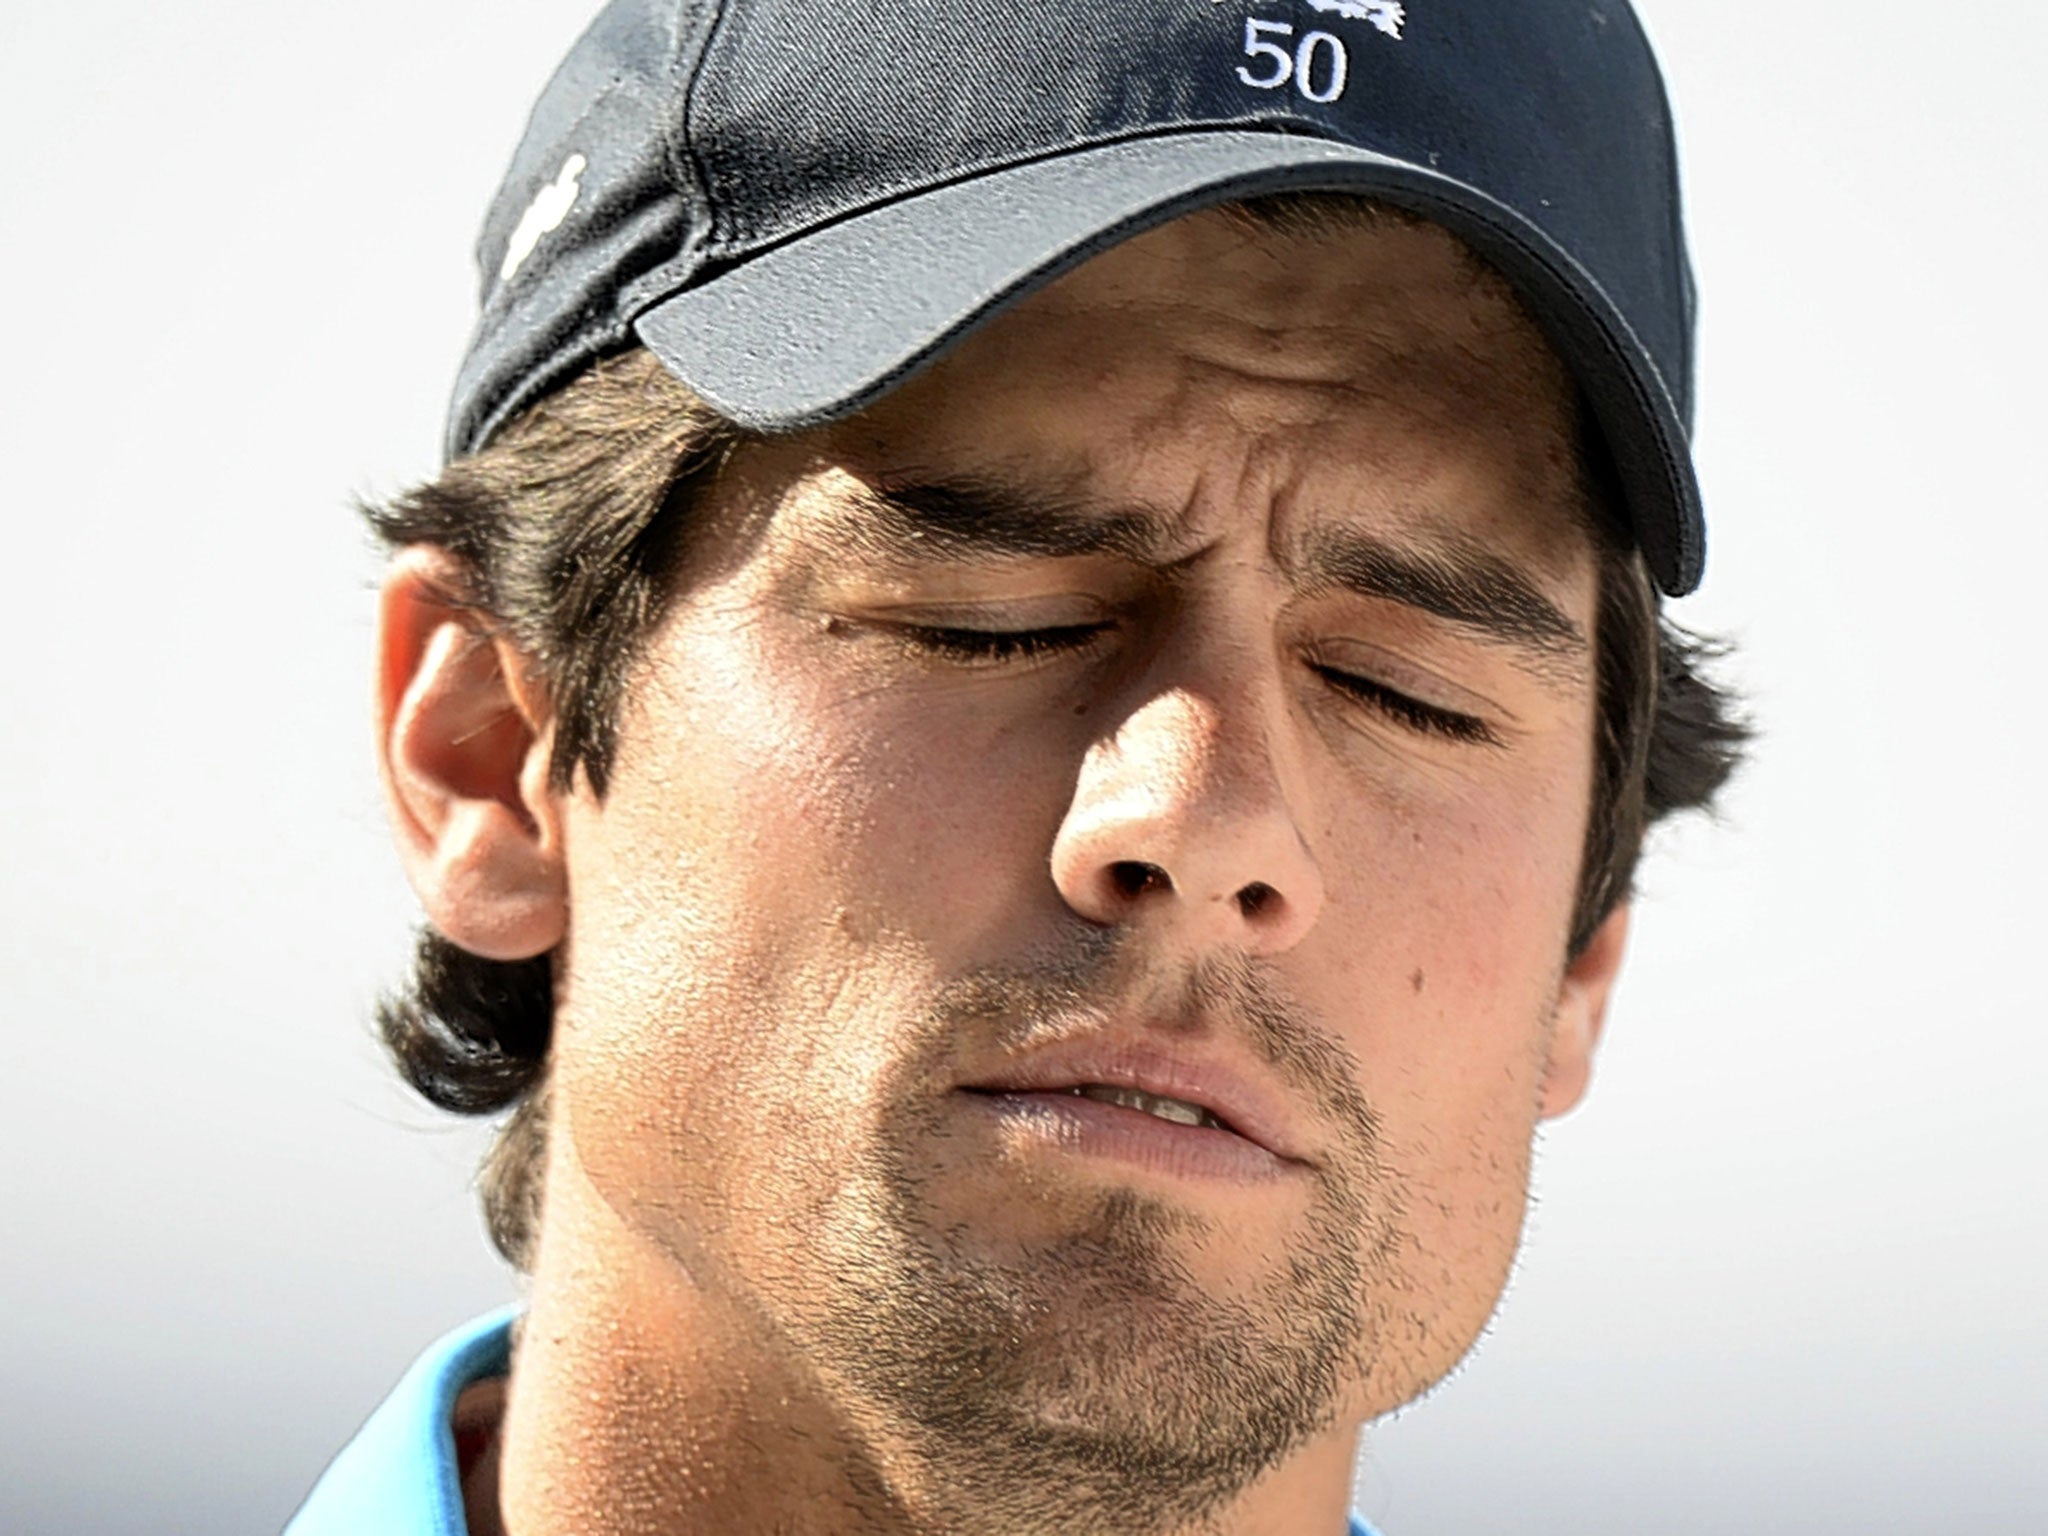 Alastair Cook has gone 38 innings without reaching a ton